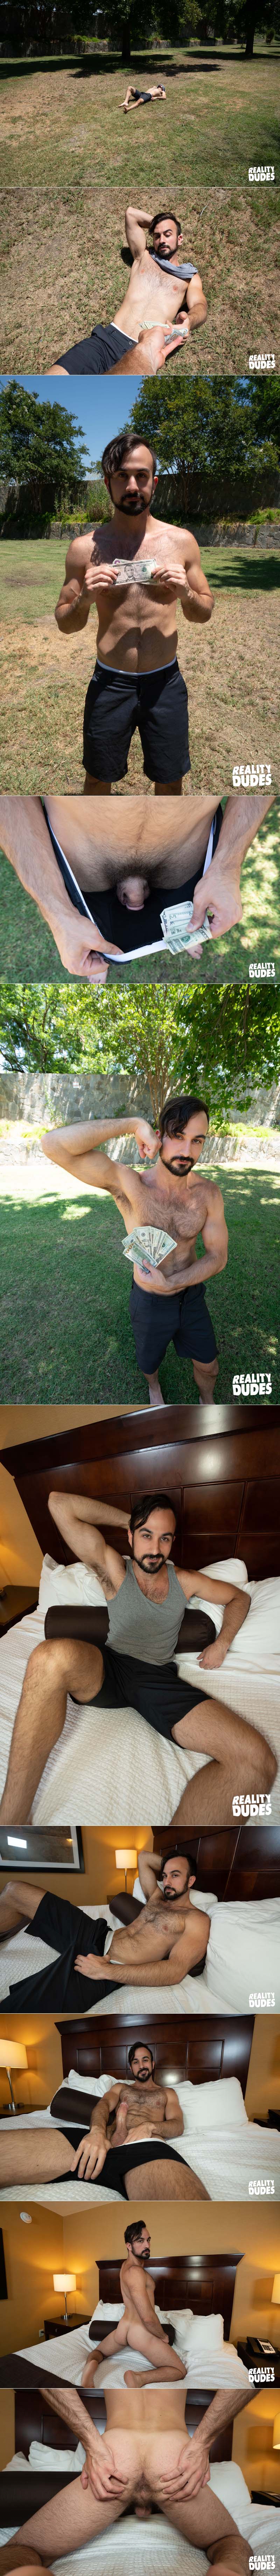 Mason Lear (Money Offered To Show His Juicy Ass) at Str8 Chaser